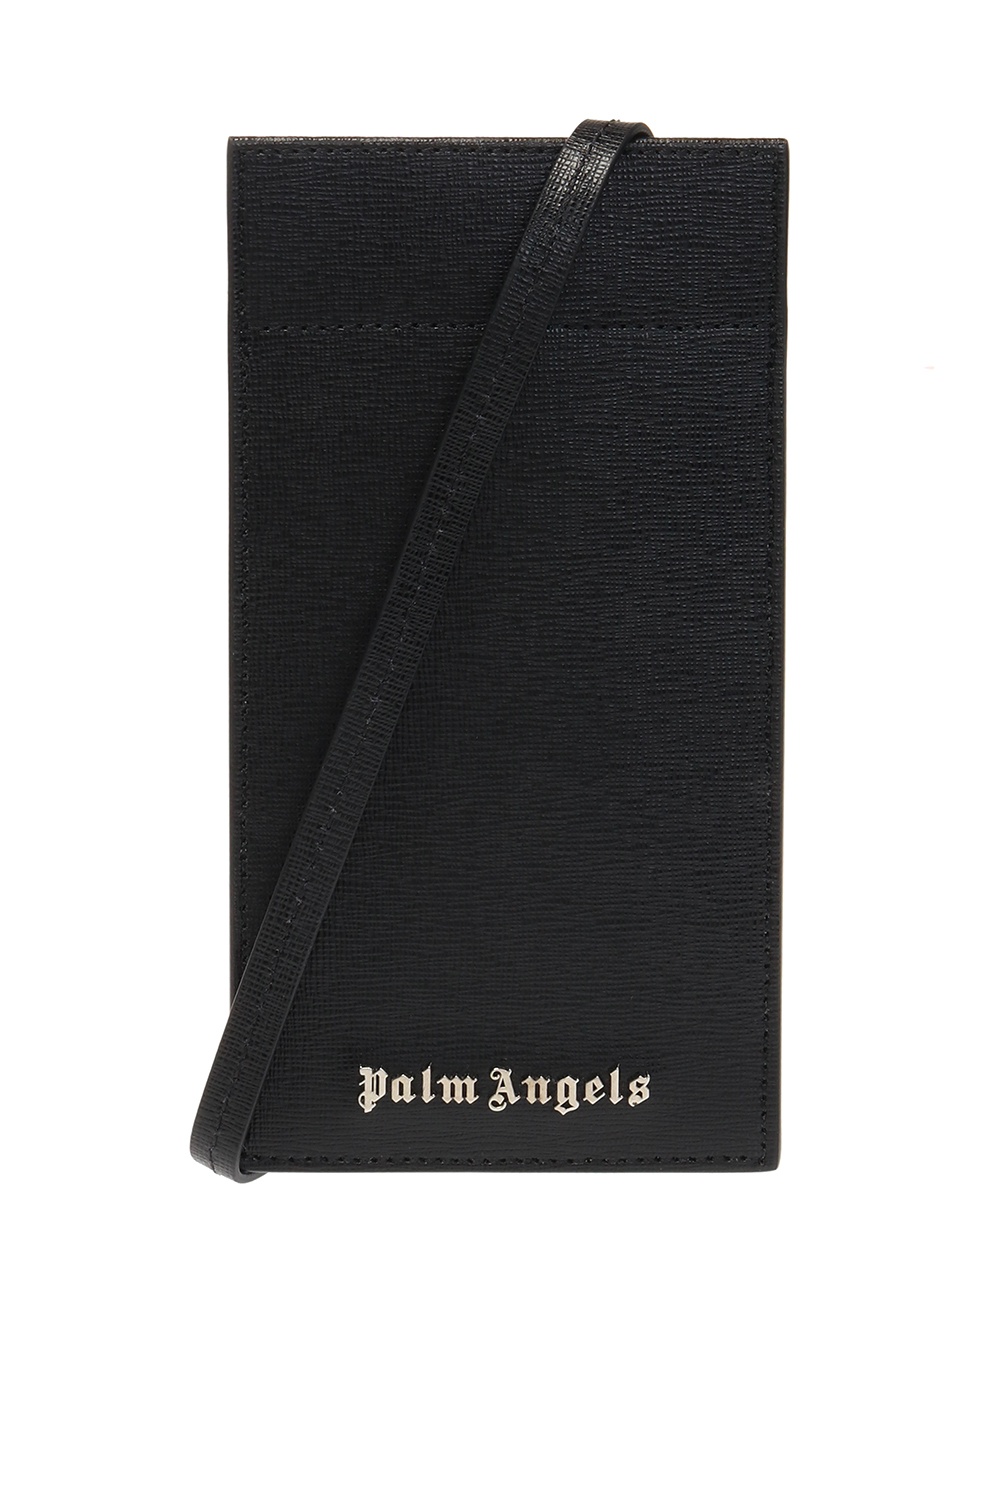 Palm Angels Glasses case with logo